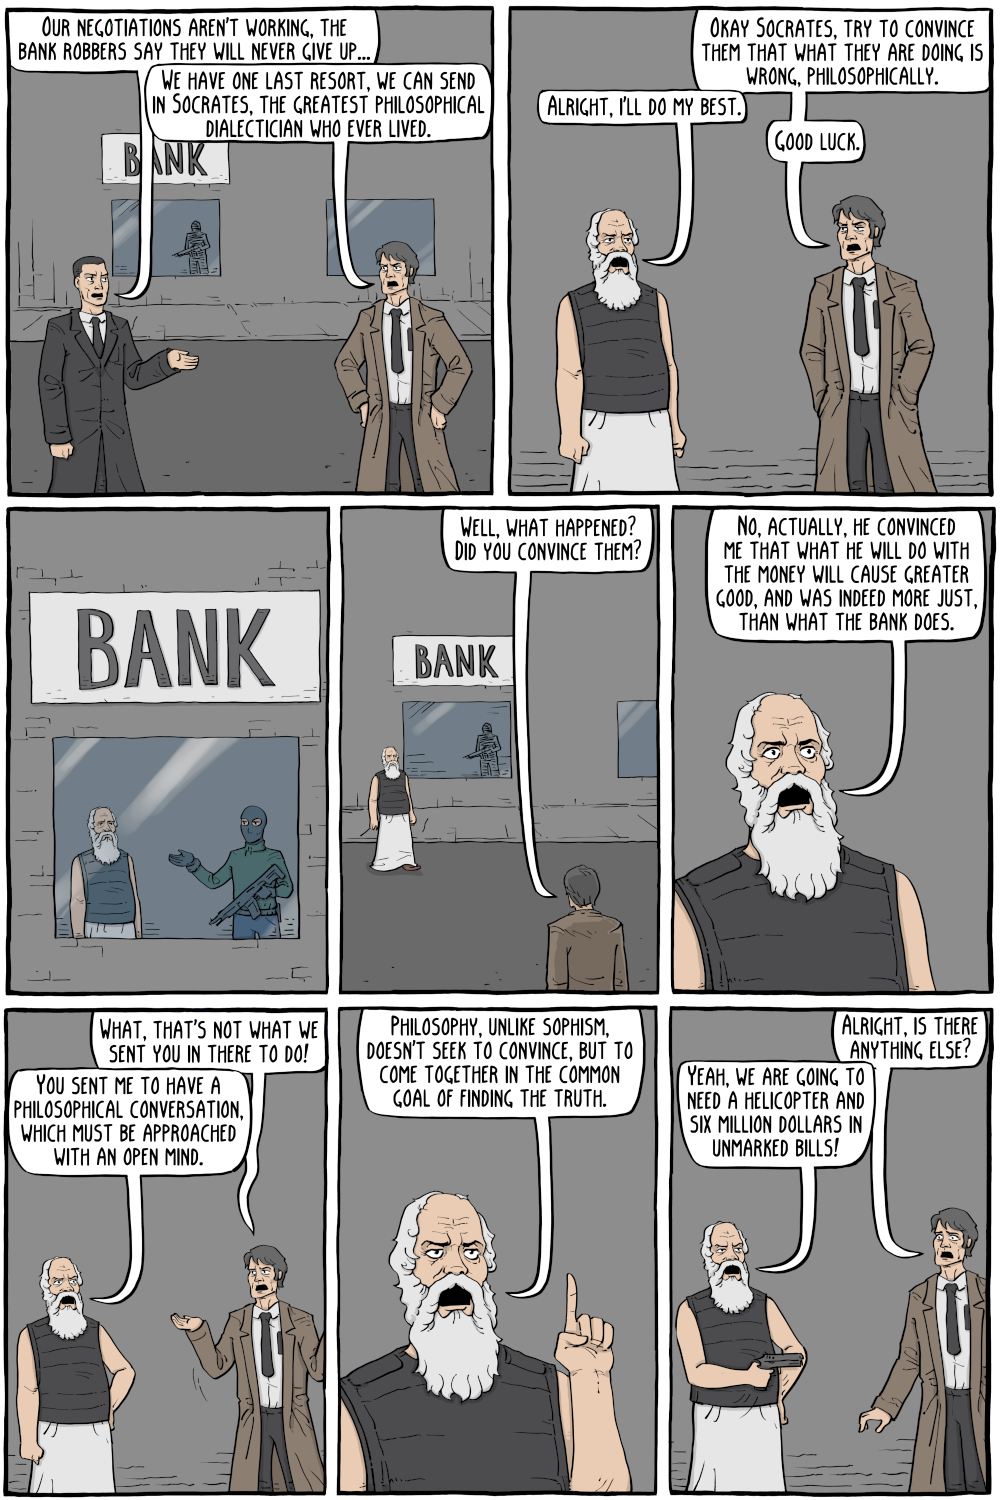 PERSON: "Our negotiations aren't working, the bank robbers say they will never give up... "

PERSON: "We have one last resort, we can send in Socrates, the greatest philosophical dialectician who ever lived."

PERSON: "Okay Socrates, try to convince them that what they are doing is wrong, philosophically."

PERSON: "Alright, i'll do my best."

PERSON: "Good luck."

PERSON: "No, actually, he convinced me that what he will do with the money will cause greater good, and was indeed more just, than what the bank does."

PERSON: "Well, what happened? Did you convince them?"

PERSON: "What, that's not what we sent you in there to do!"

PERSON: "You sent me to have a philosophical conversation, which must be approached with an open mind."

PERSON: "Alright, is there anything else?"

PERSON: "Philosophy, unlike sophism, doesn't seek to convince, but to come together in the common goalof finding the truth."

PERSON: "Yeah, we are going to need a helicopter and six million dollars in unmarked bills!"

